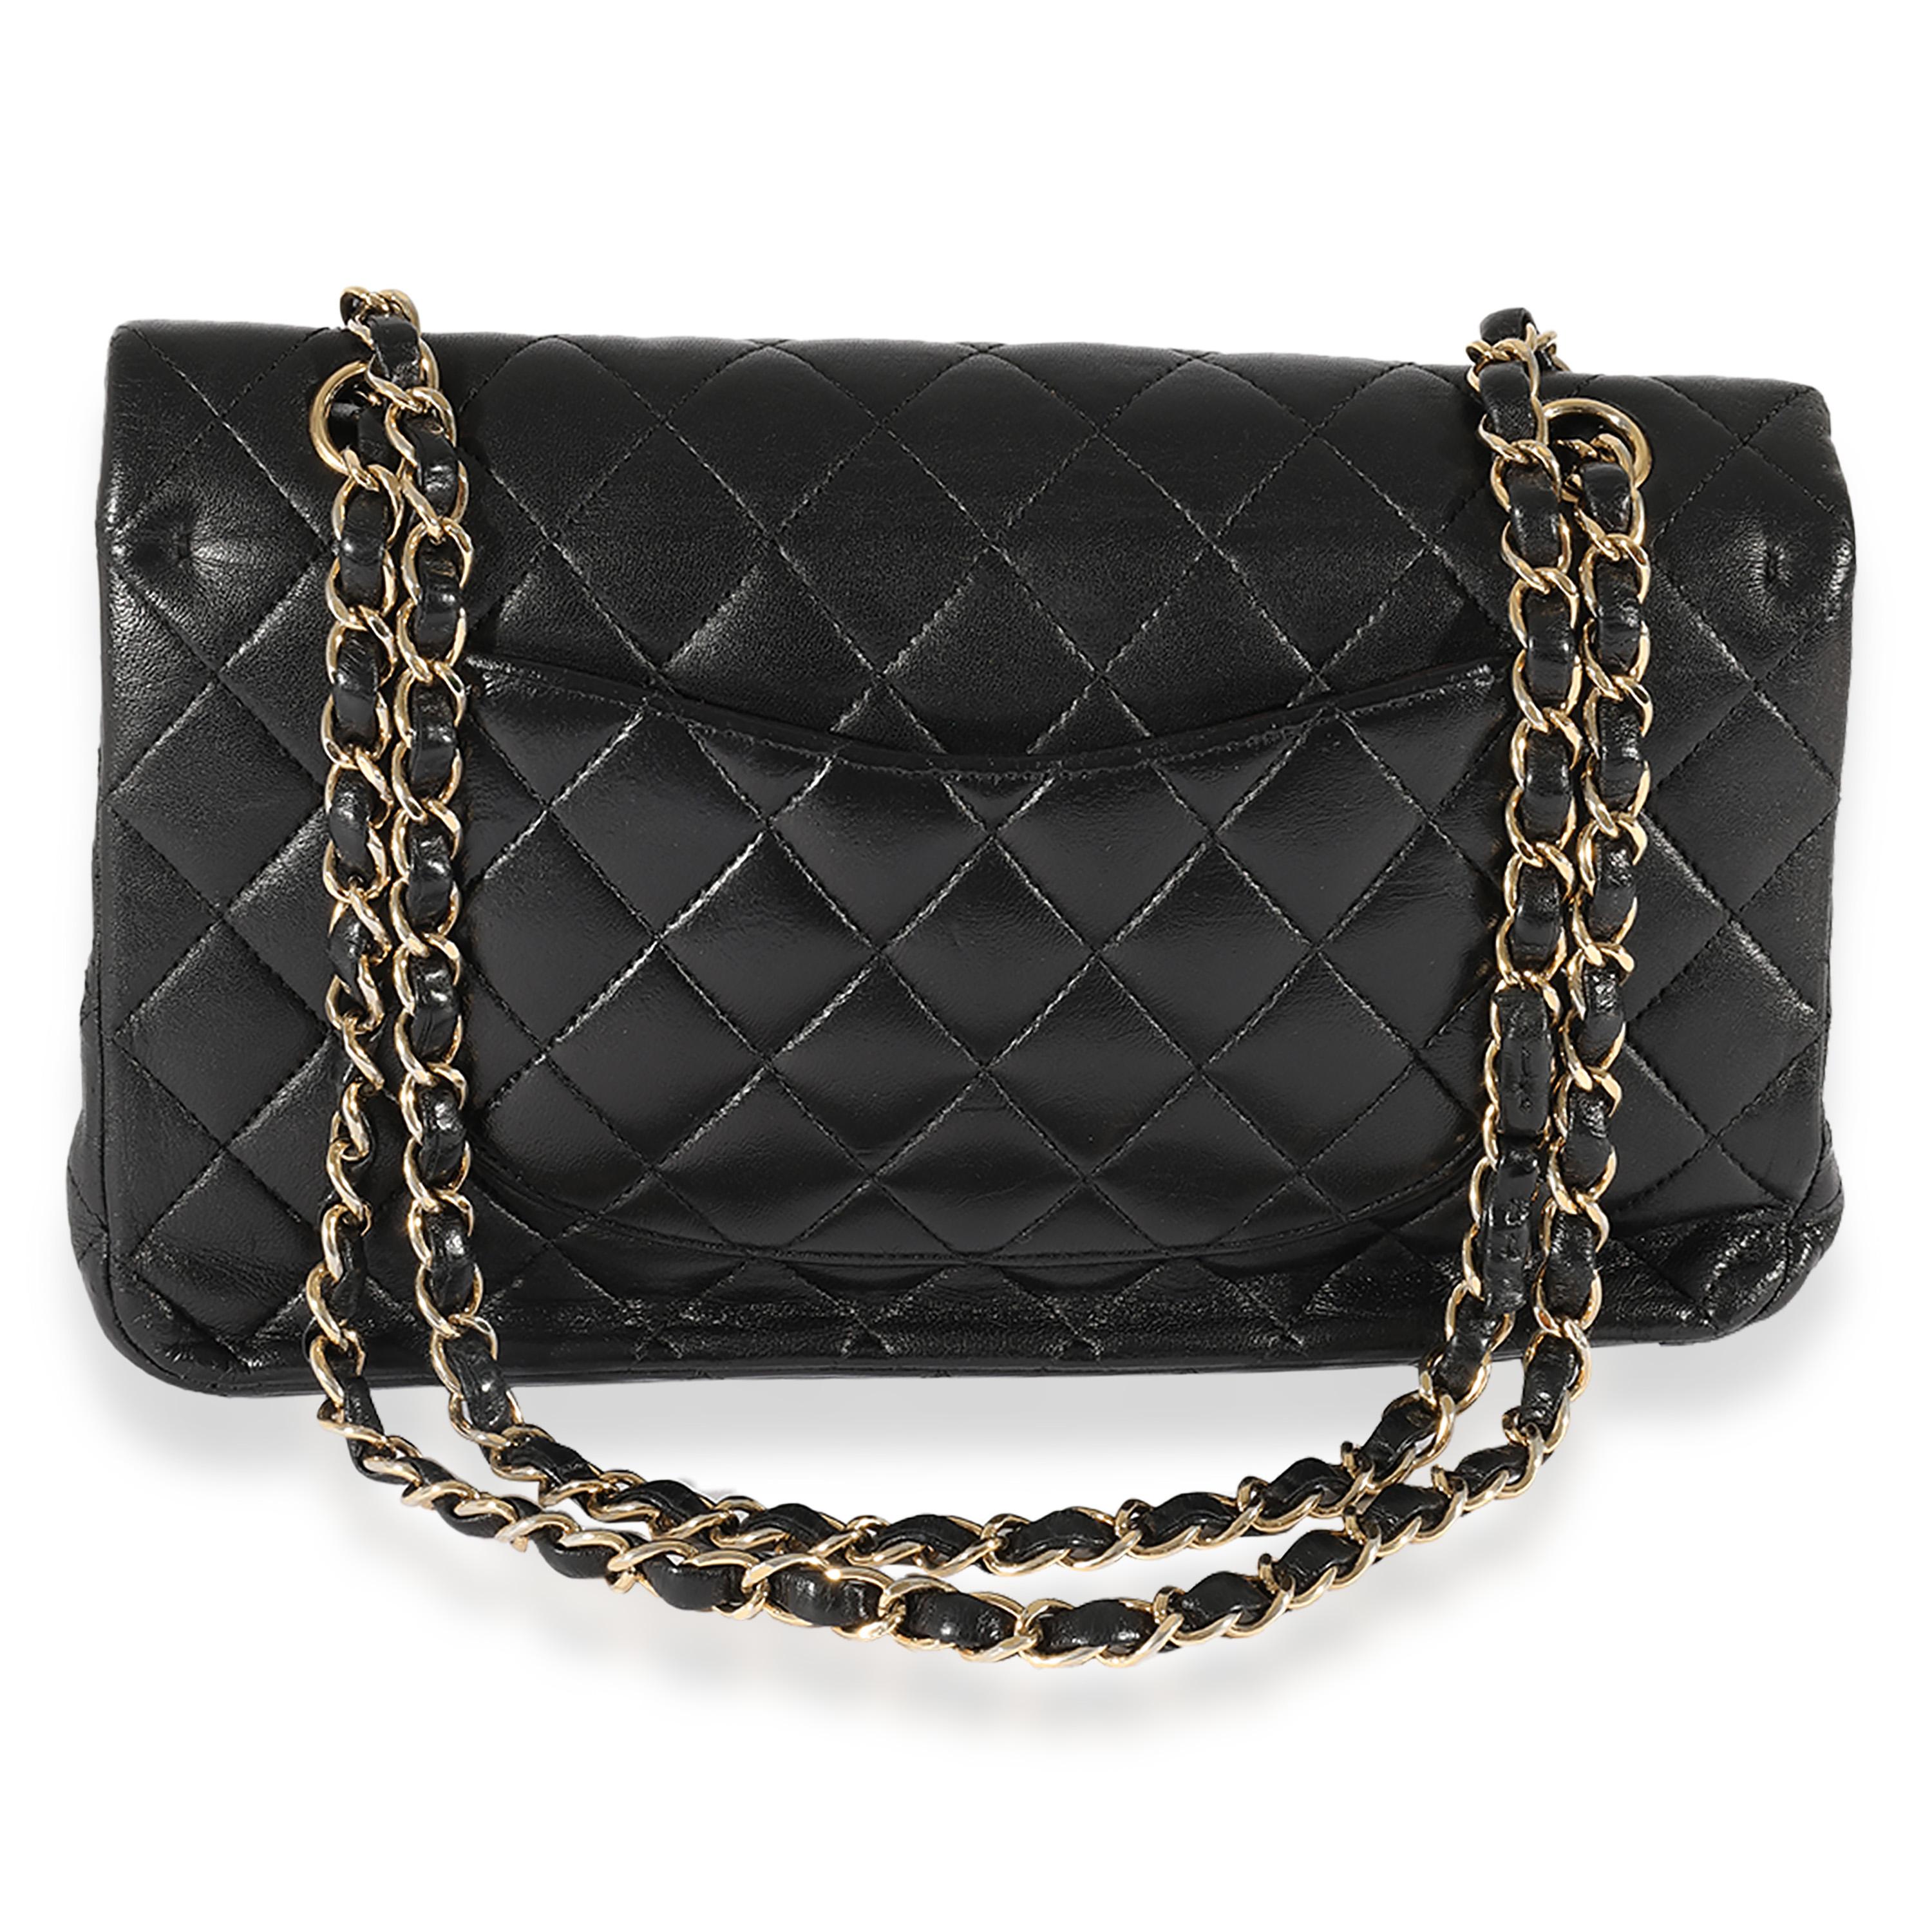 Chanel Black Quilted Lambskin Medium Classic Double Flap Bag In Excellent Condition For Sale In New York, NY